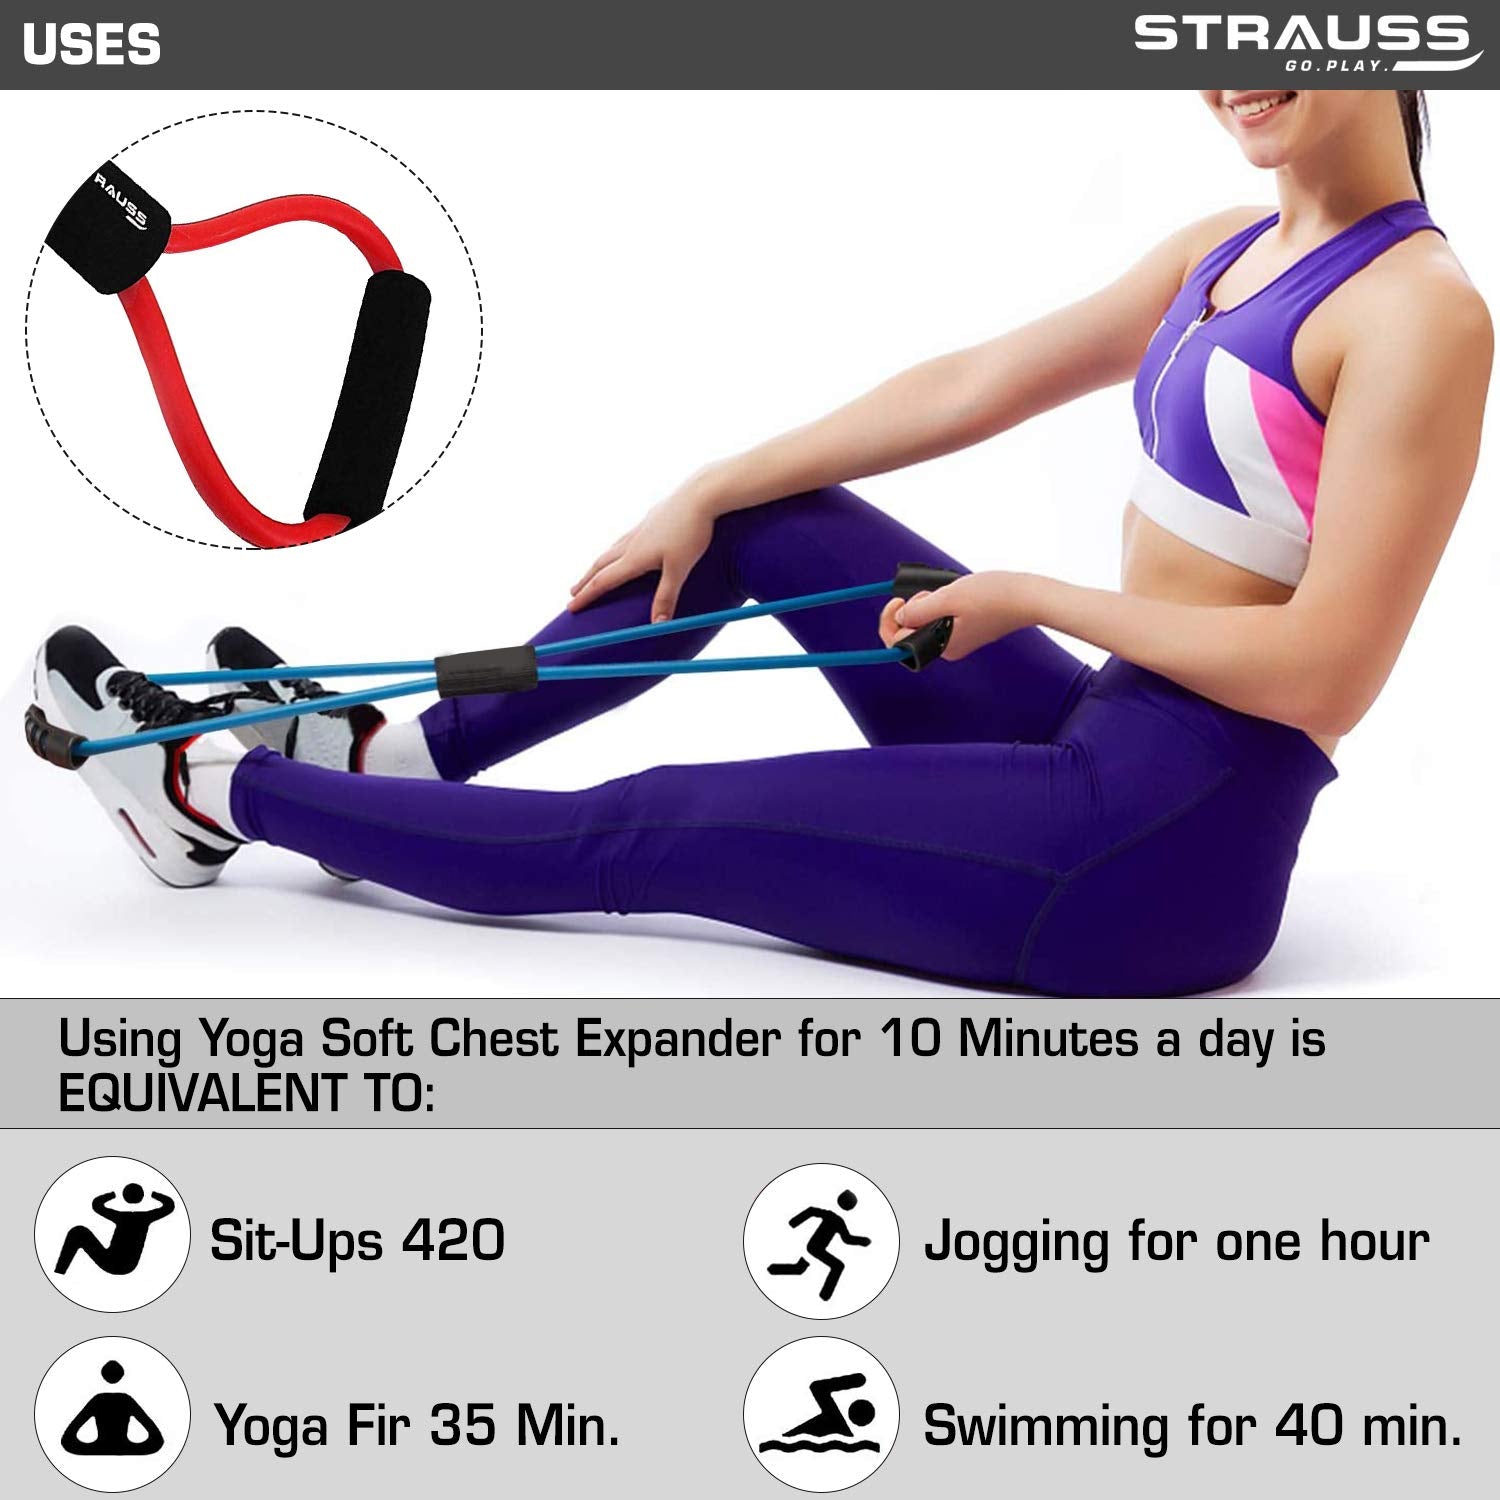 Strauss Yoga Chest Expander | Ideal for Yoga, Gym, Home Workout | Premium Natural Latex, Lightweight, Soft & Comfortable Handle | 8 Shape Toning & Resistance Tube, (Red)